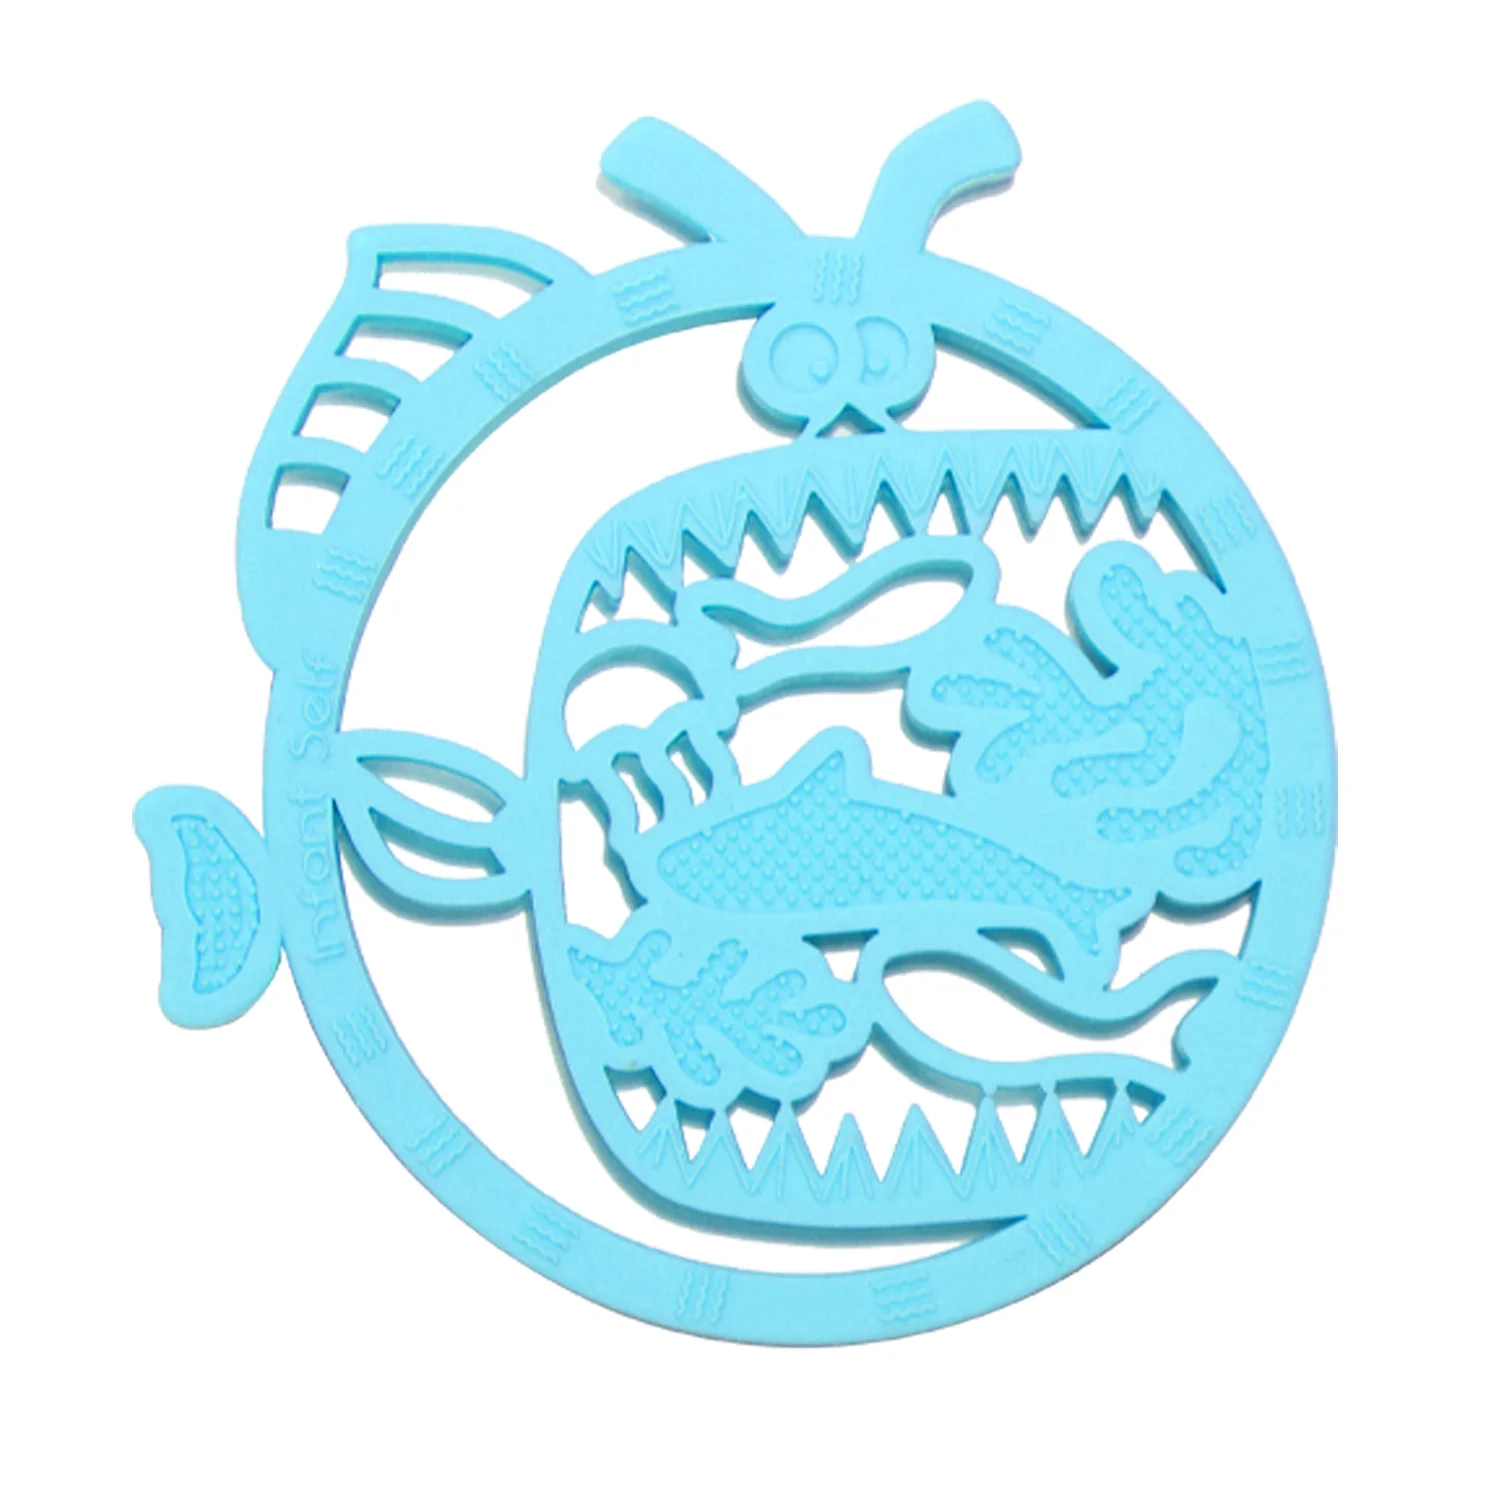 Infant Teething Safe for Infants Toddlers Silicone Baby Teethers